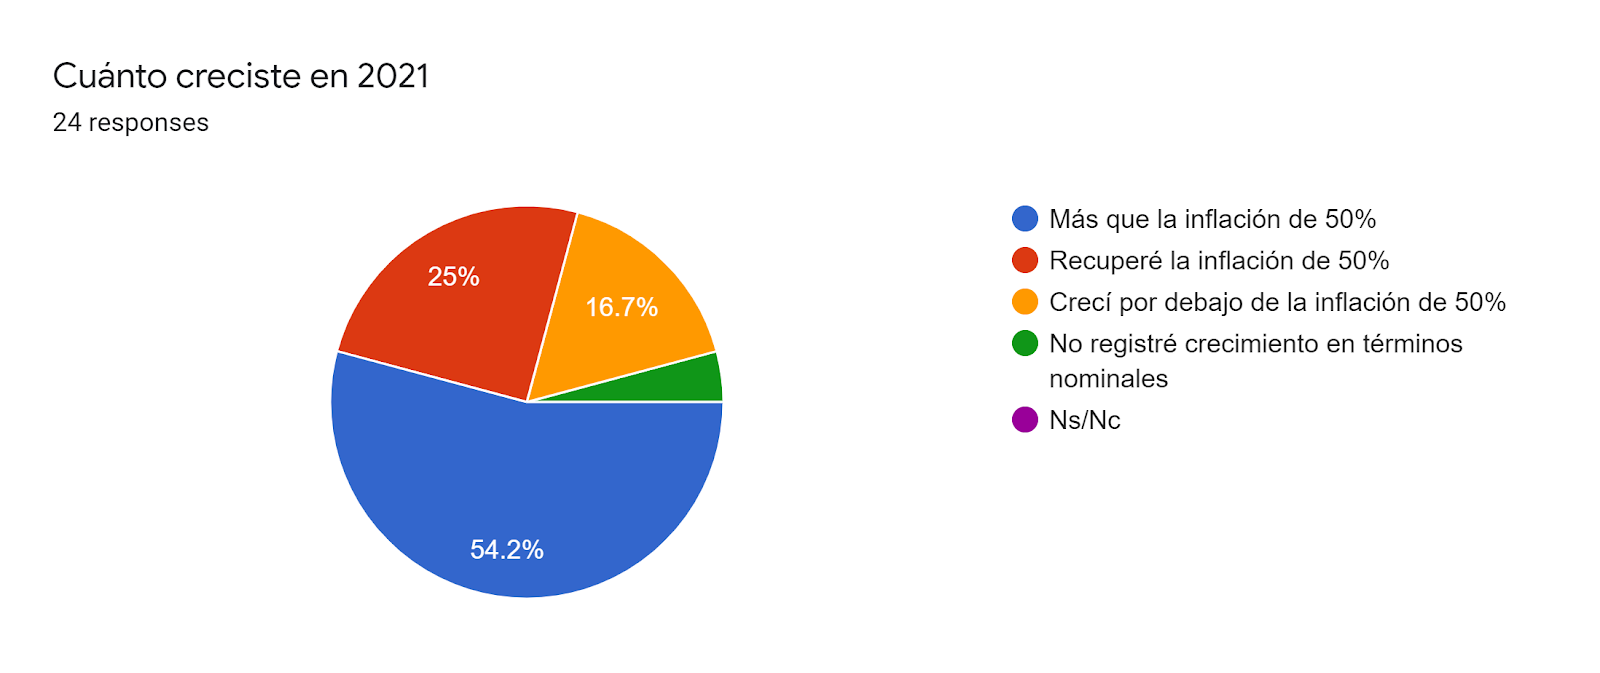 Forms response chart. Question title: Cuánto creciste en 2021. Number of responses: 24 responses.